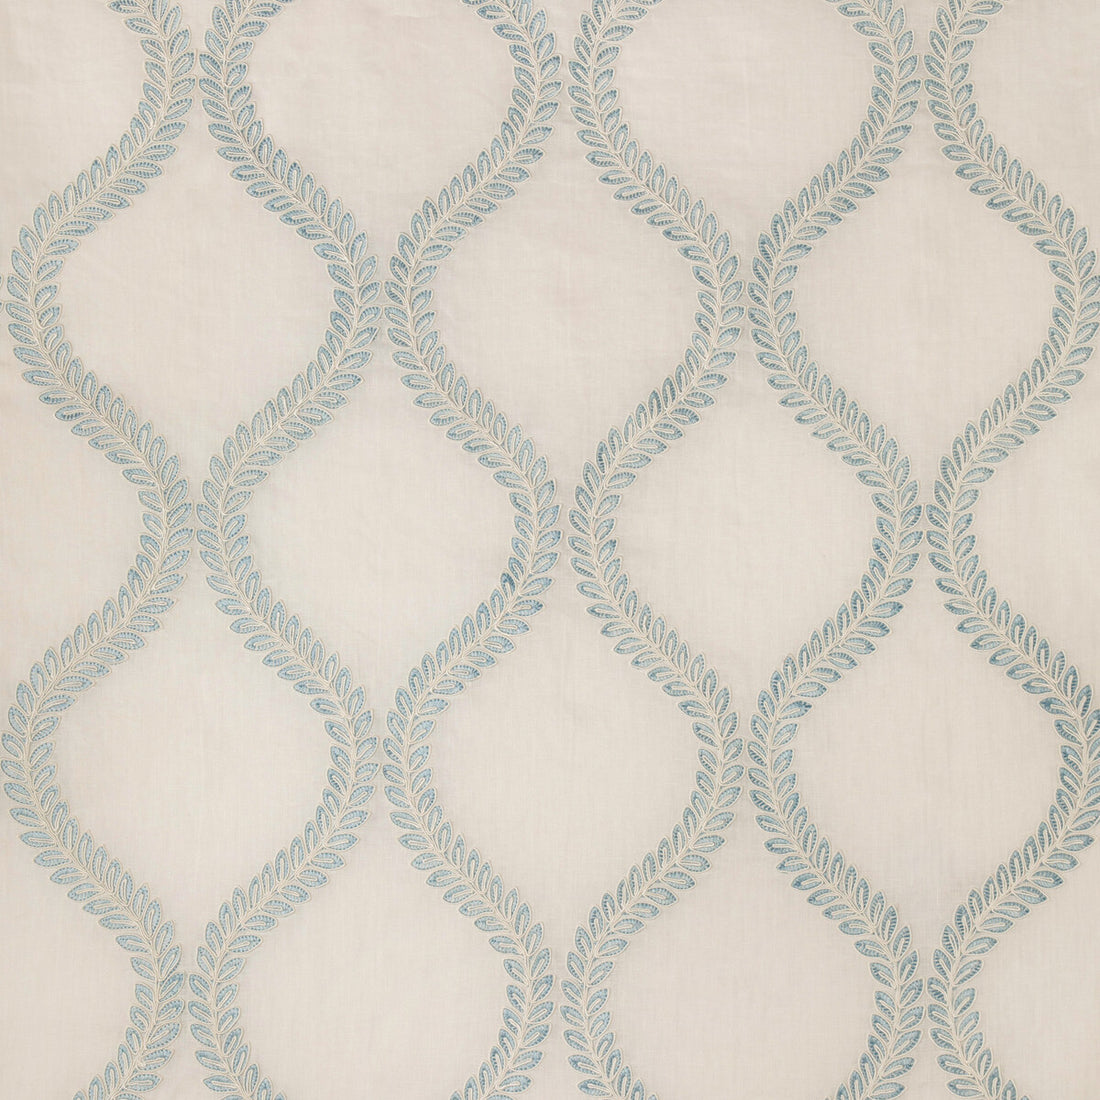 Camus Sheer fabric in sky color - pattern 8023110.15.0 - by Brunschwig &amp; Fils in the Anduze Embroideries collection